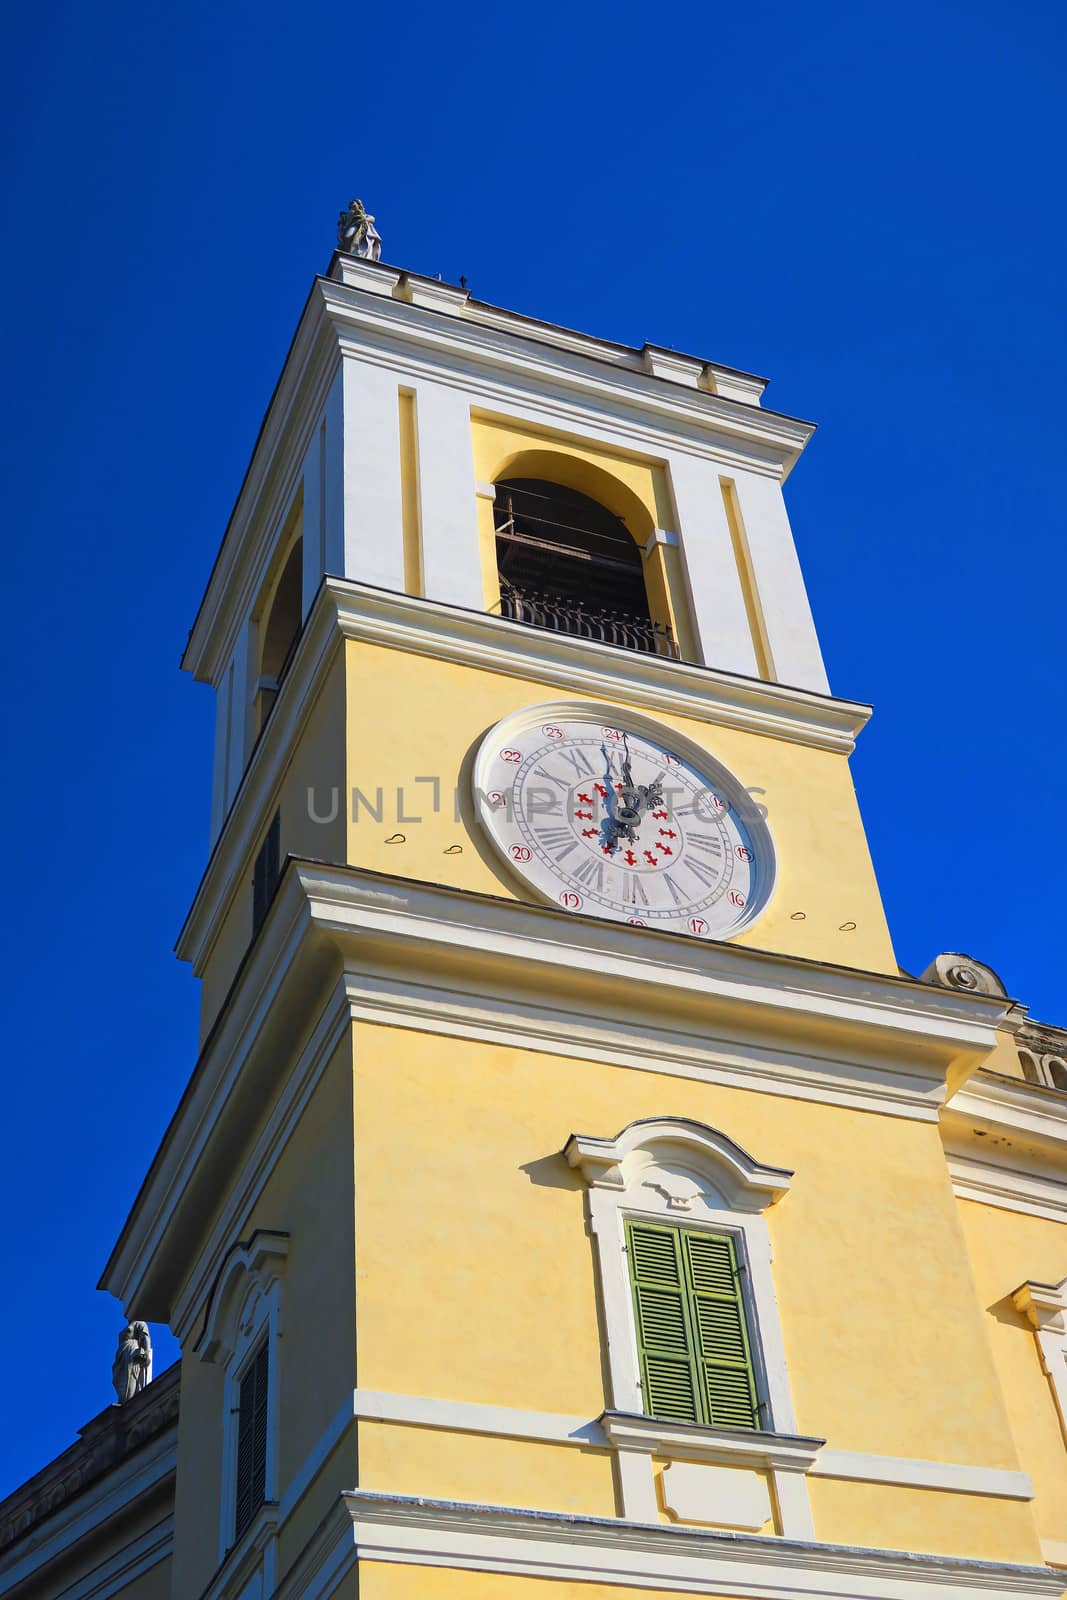 Colorno,Italy, 8 november 2015.Clock tower of the ducal palace of Colorno(province of Parma),Italy.It was built by Francesco Farnese, Duke of Parma in the early 18th century.After the Congress of Vienna, the duchy of Parma went to Marie Louise, Napoleon's wife, who made the Reggia her favourite residence and created a wide English-style garden.